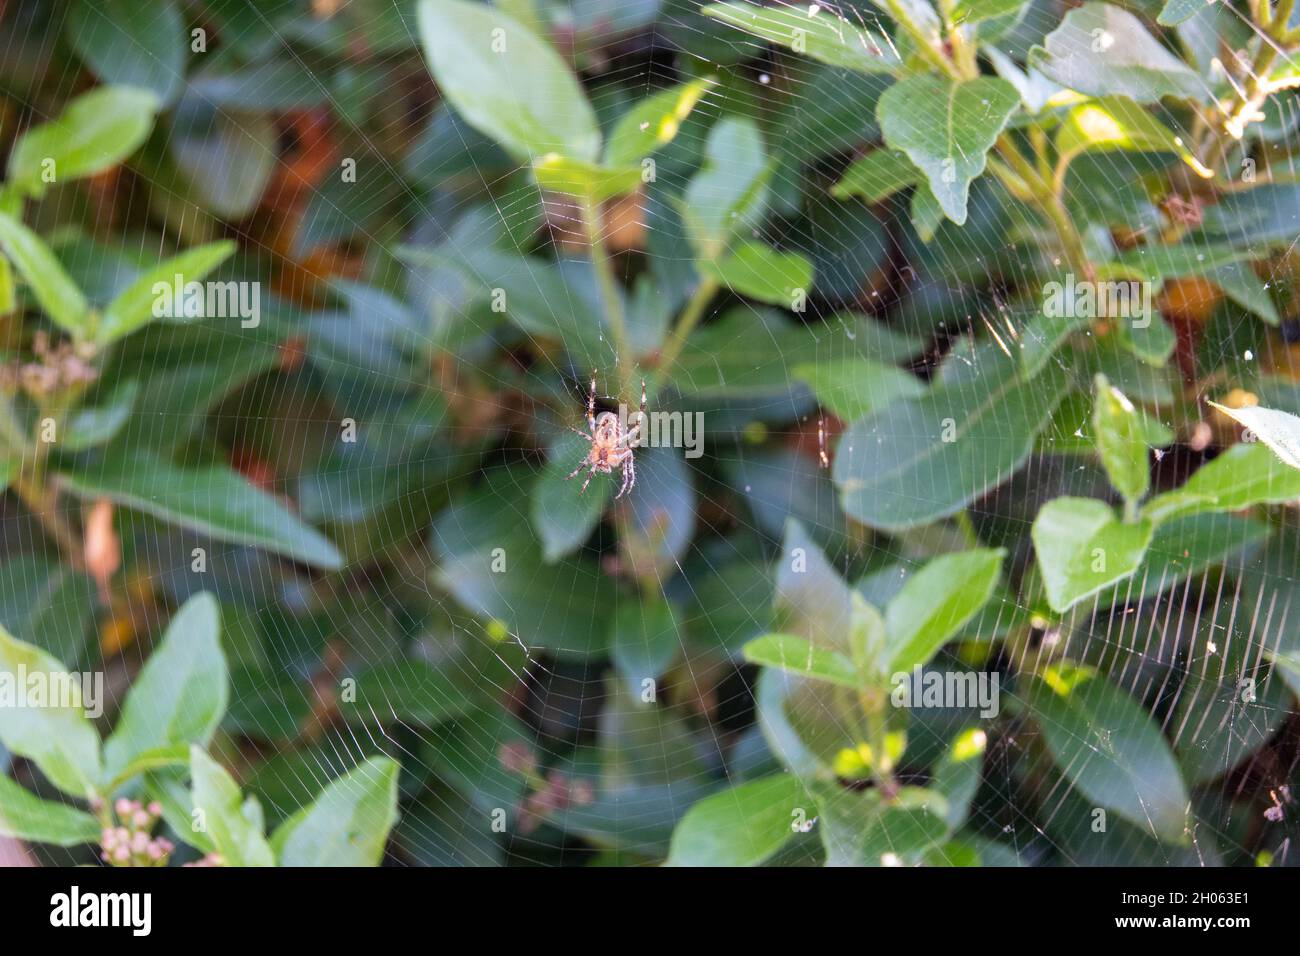 spider in a web with green foliage in the background Stock Photo